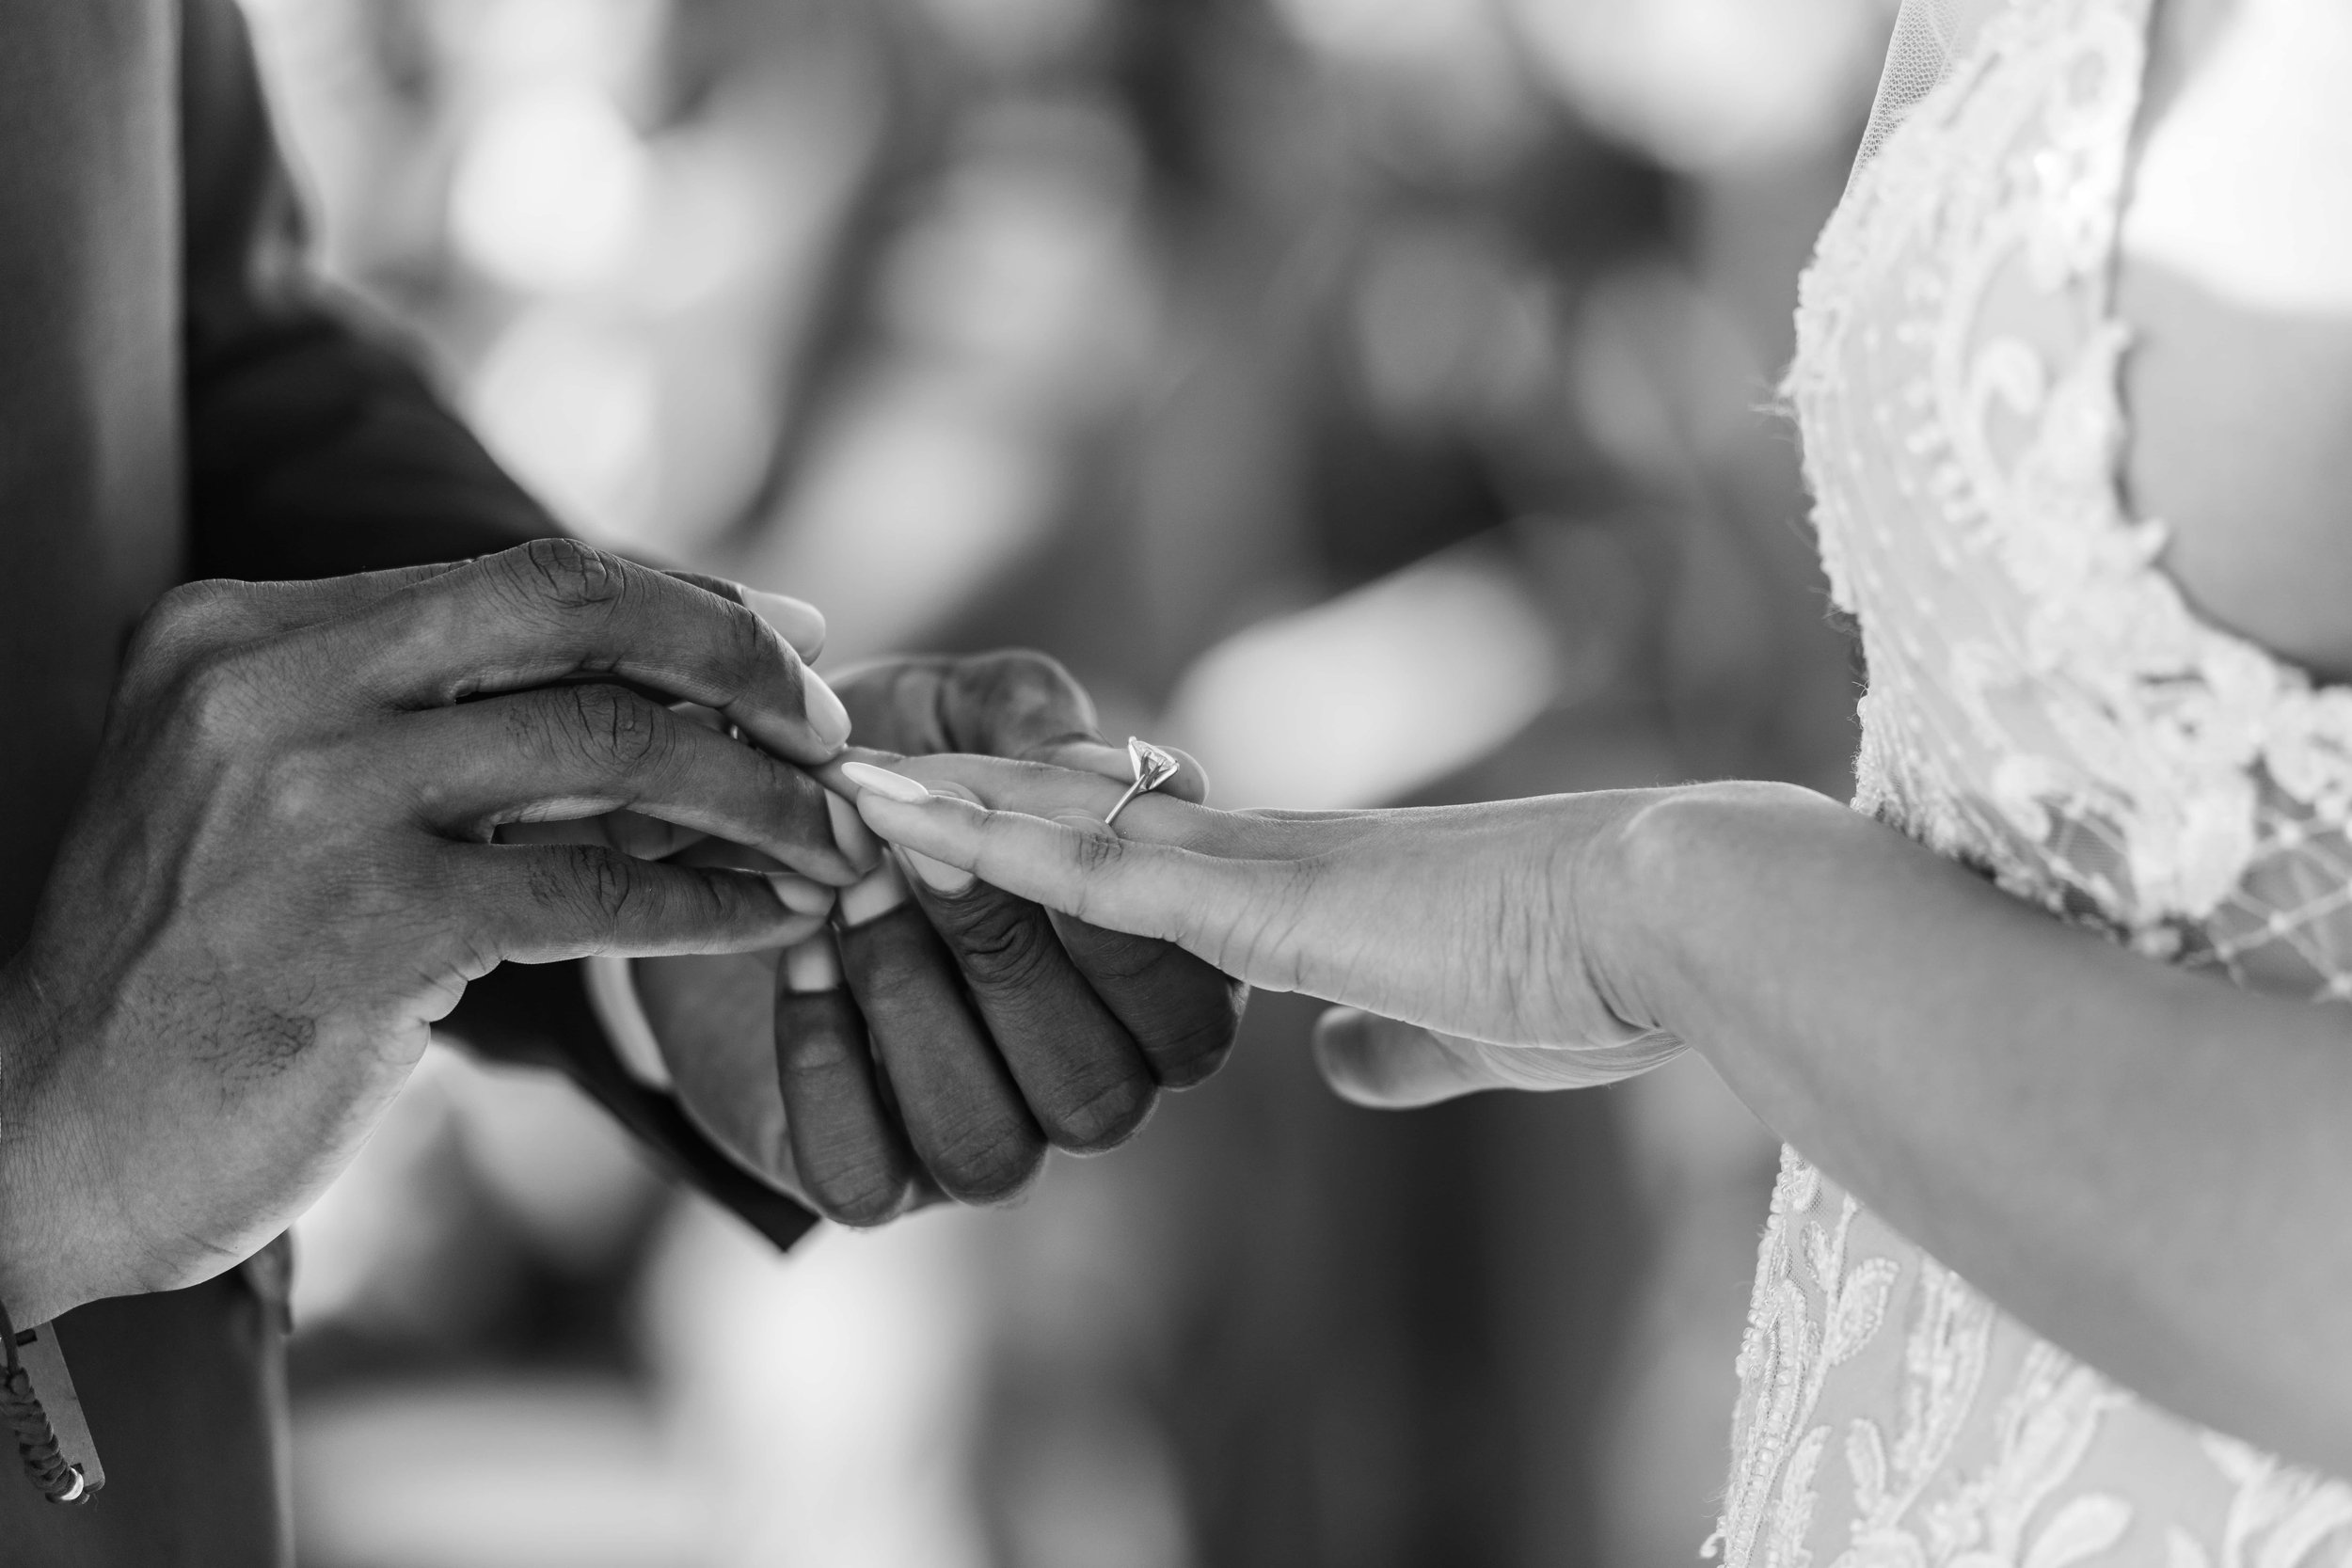  A black-and-white photo capturing a wedding ceremony moment where a groom slides a ring onto the bride's finger with both hands gently touching. 